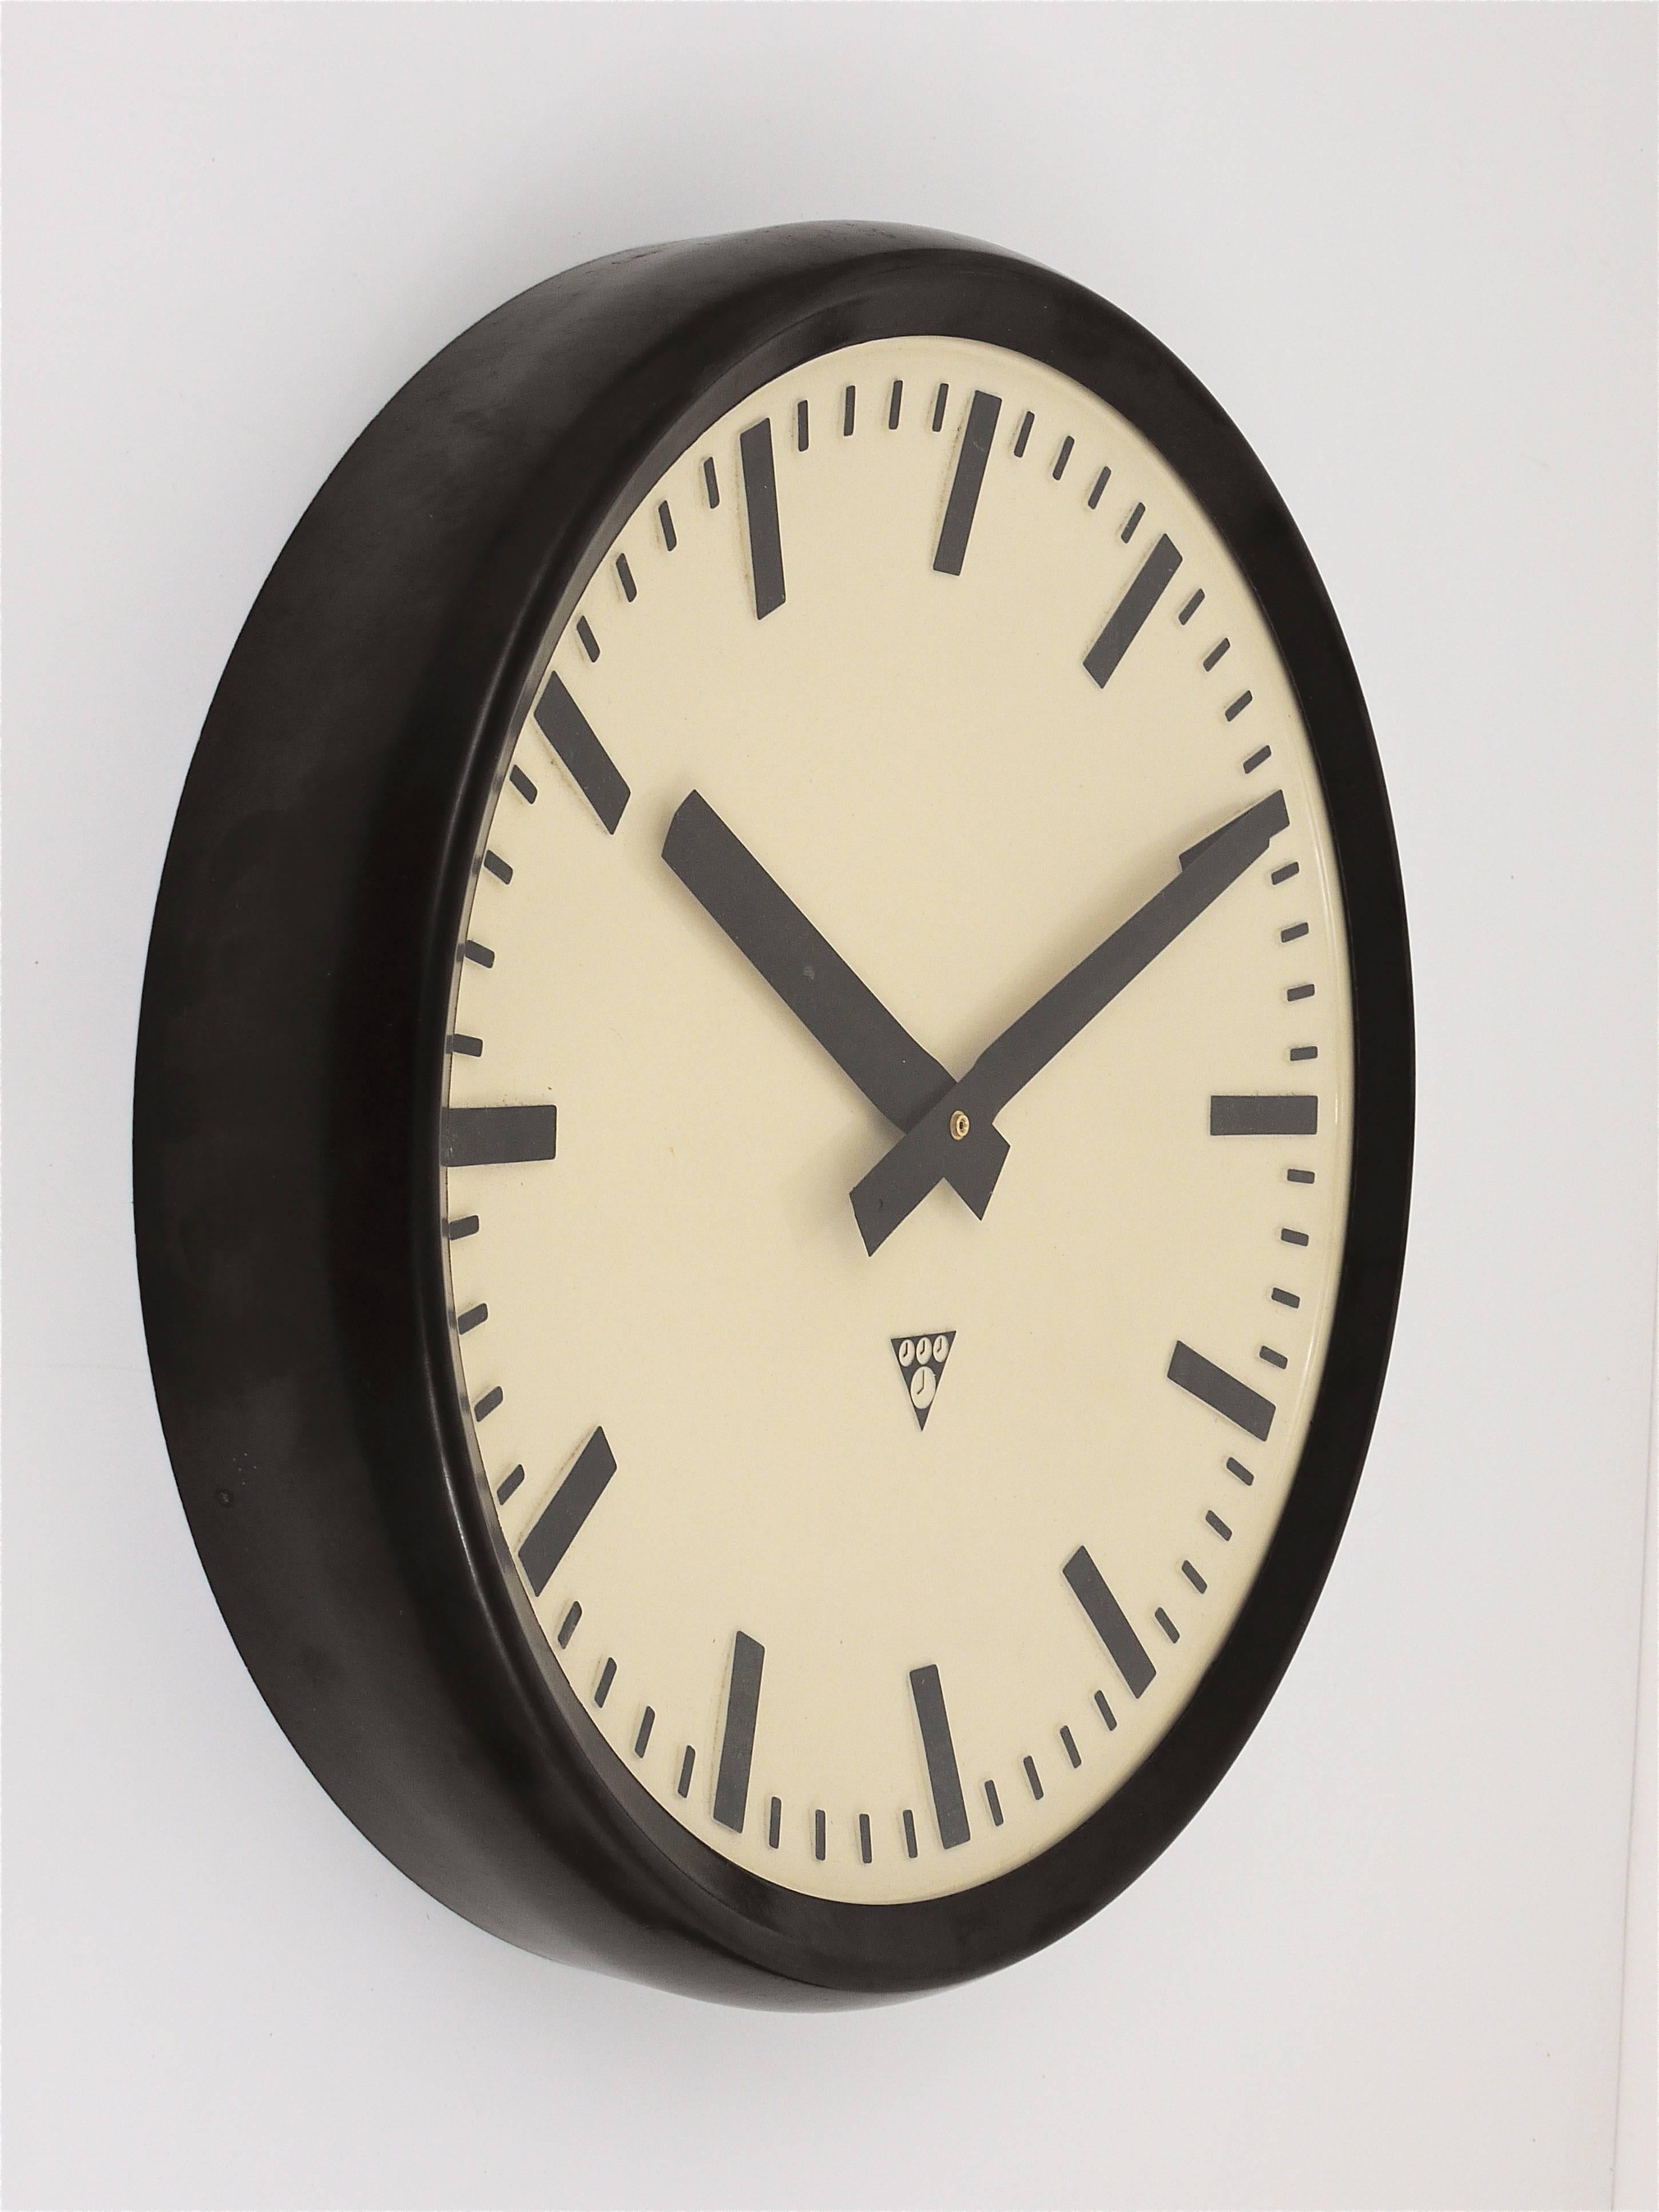 A very big loft or Industrial wall clock from the 1940s. Very straight and beautiful design, with a domed clocks face, the housing is made of dark brown / black bakelite. Measures: 19 inch diameter. Powered by a quartz movement, so it is working